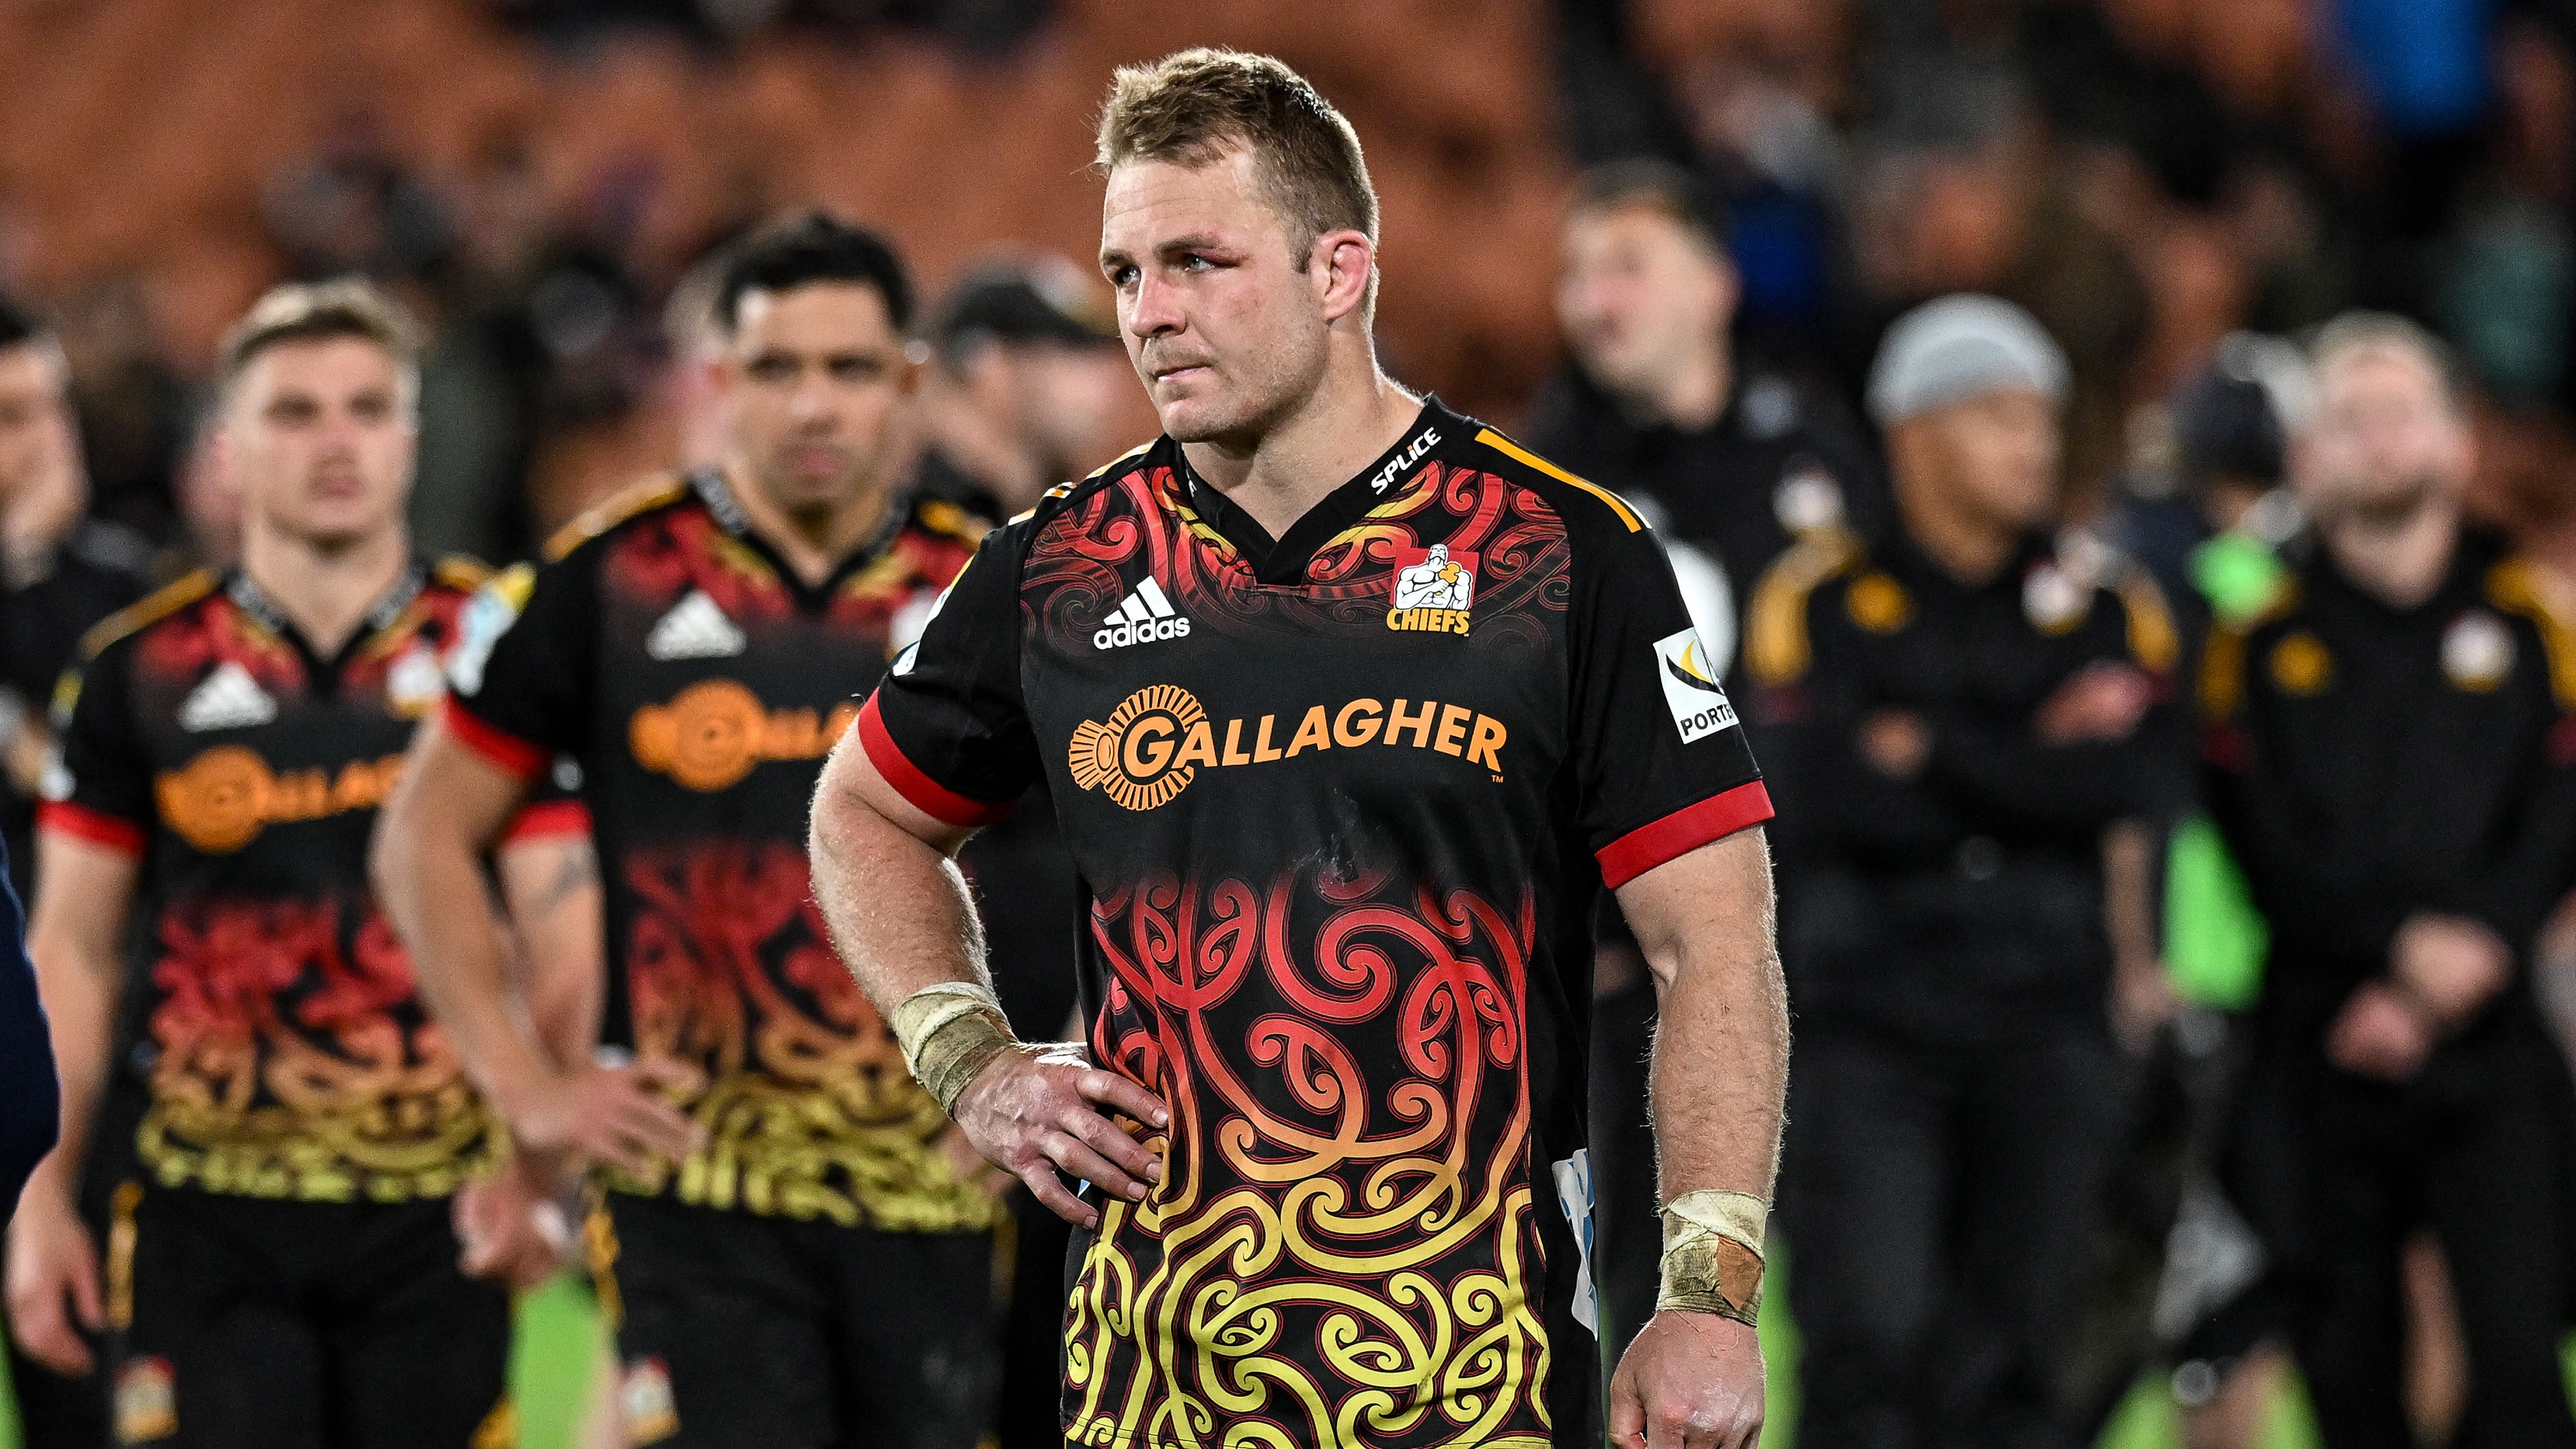 New Chiefs Rugby Jersey 2016- Waikato Chiefs Super Rugby Home Shirt 2016